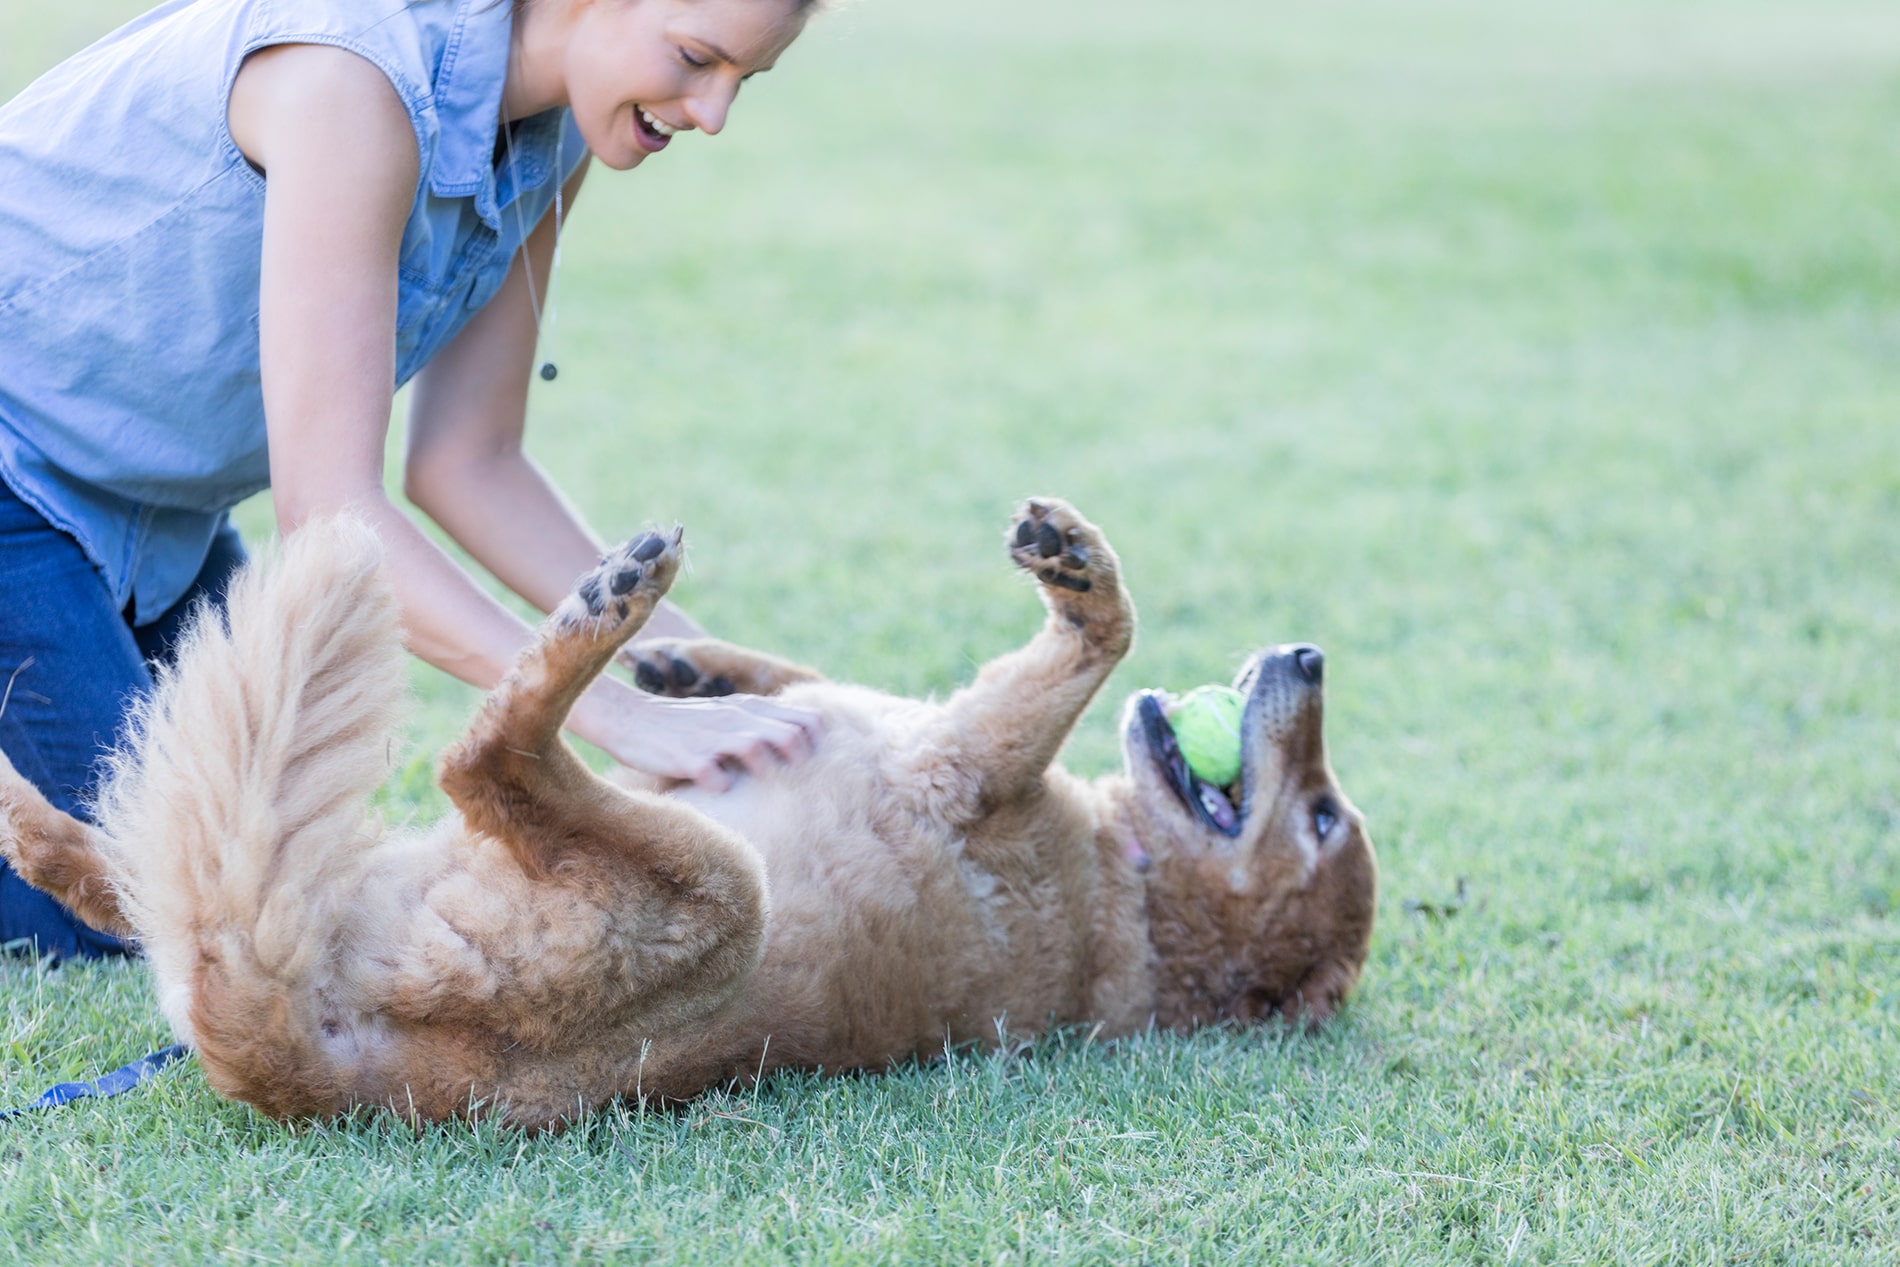 Person playing with dog in grass